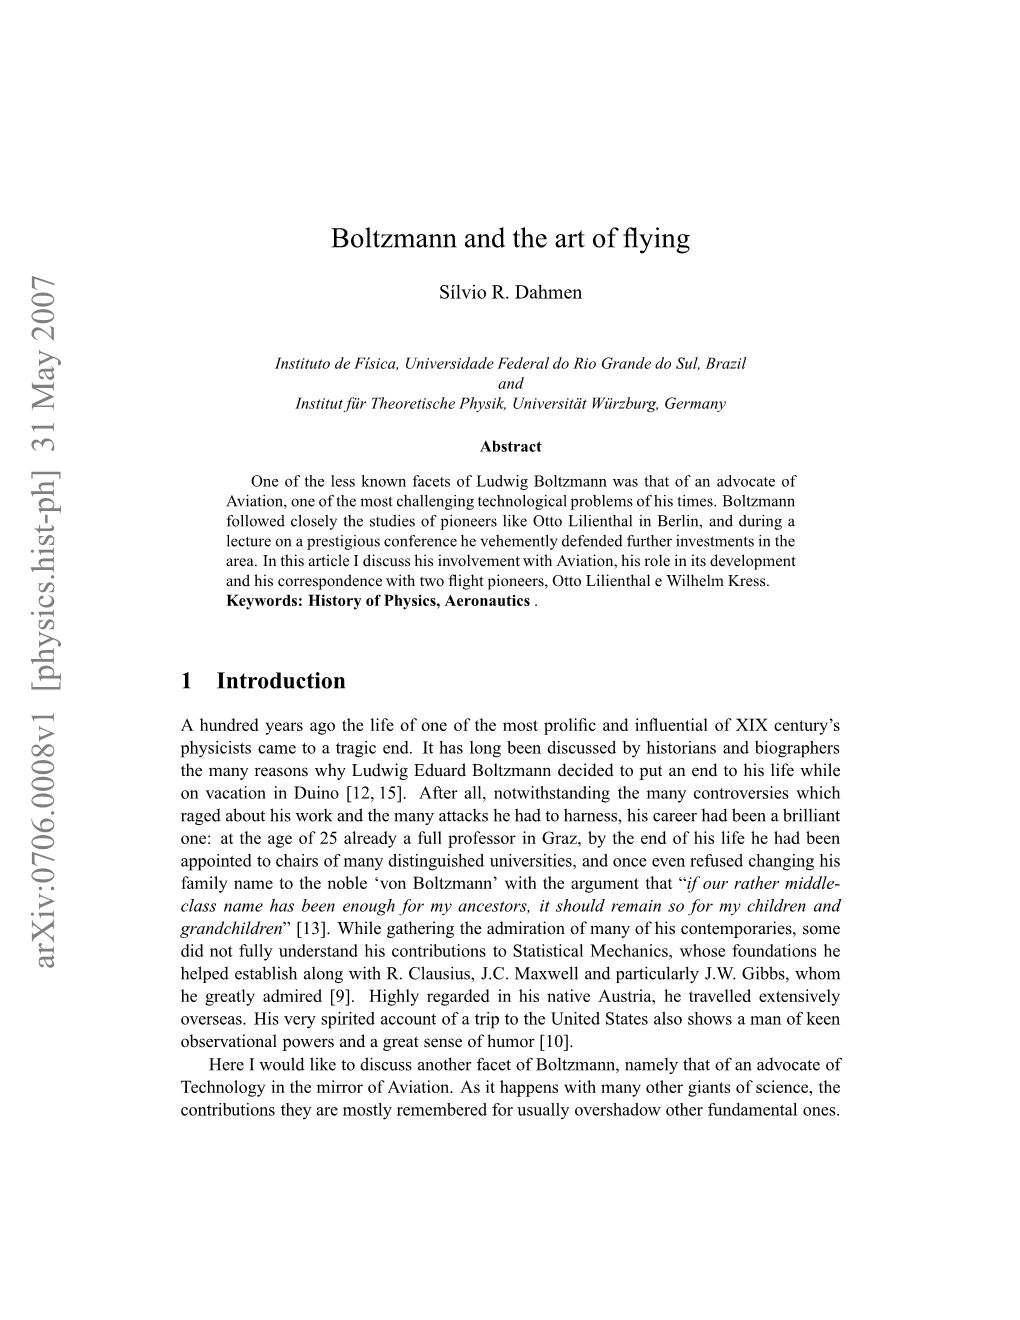 Boltzmann and the Art of Flying